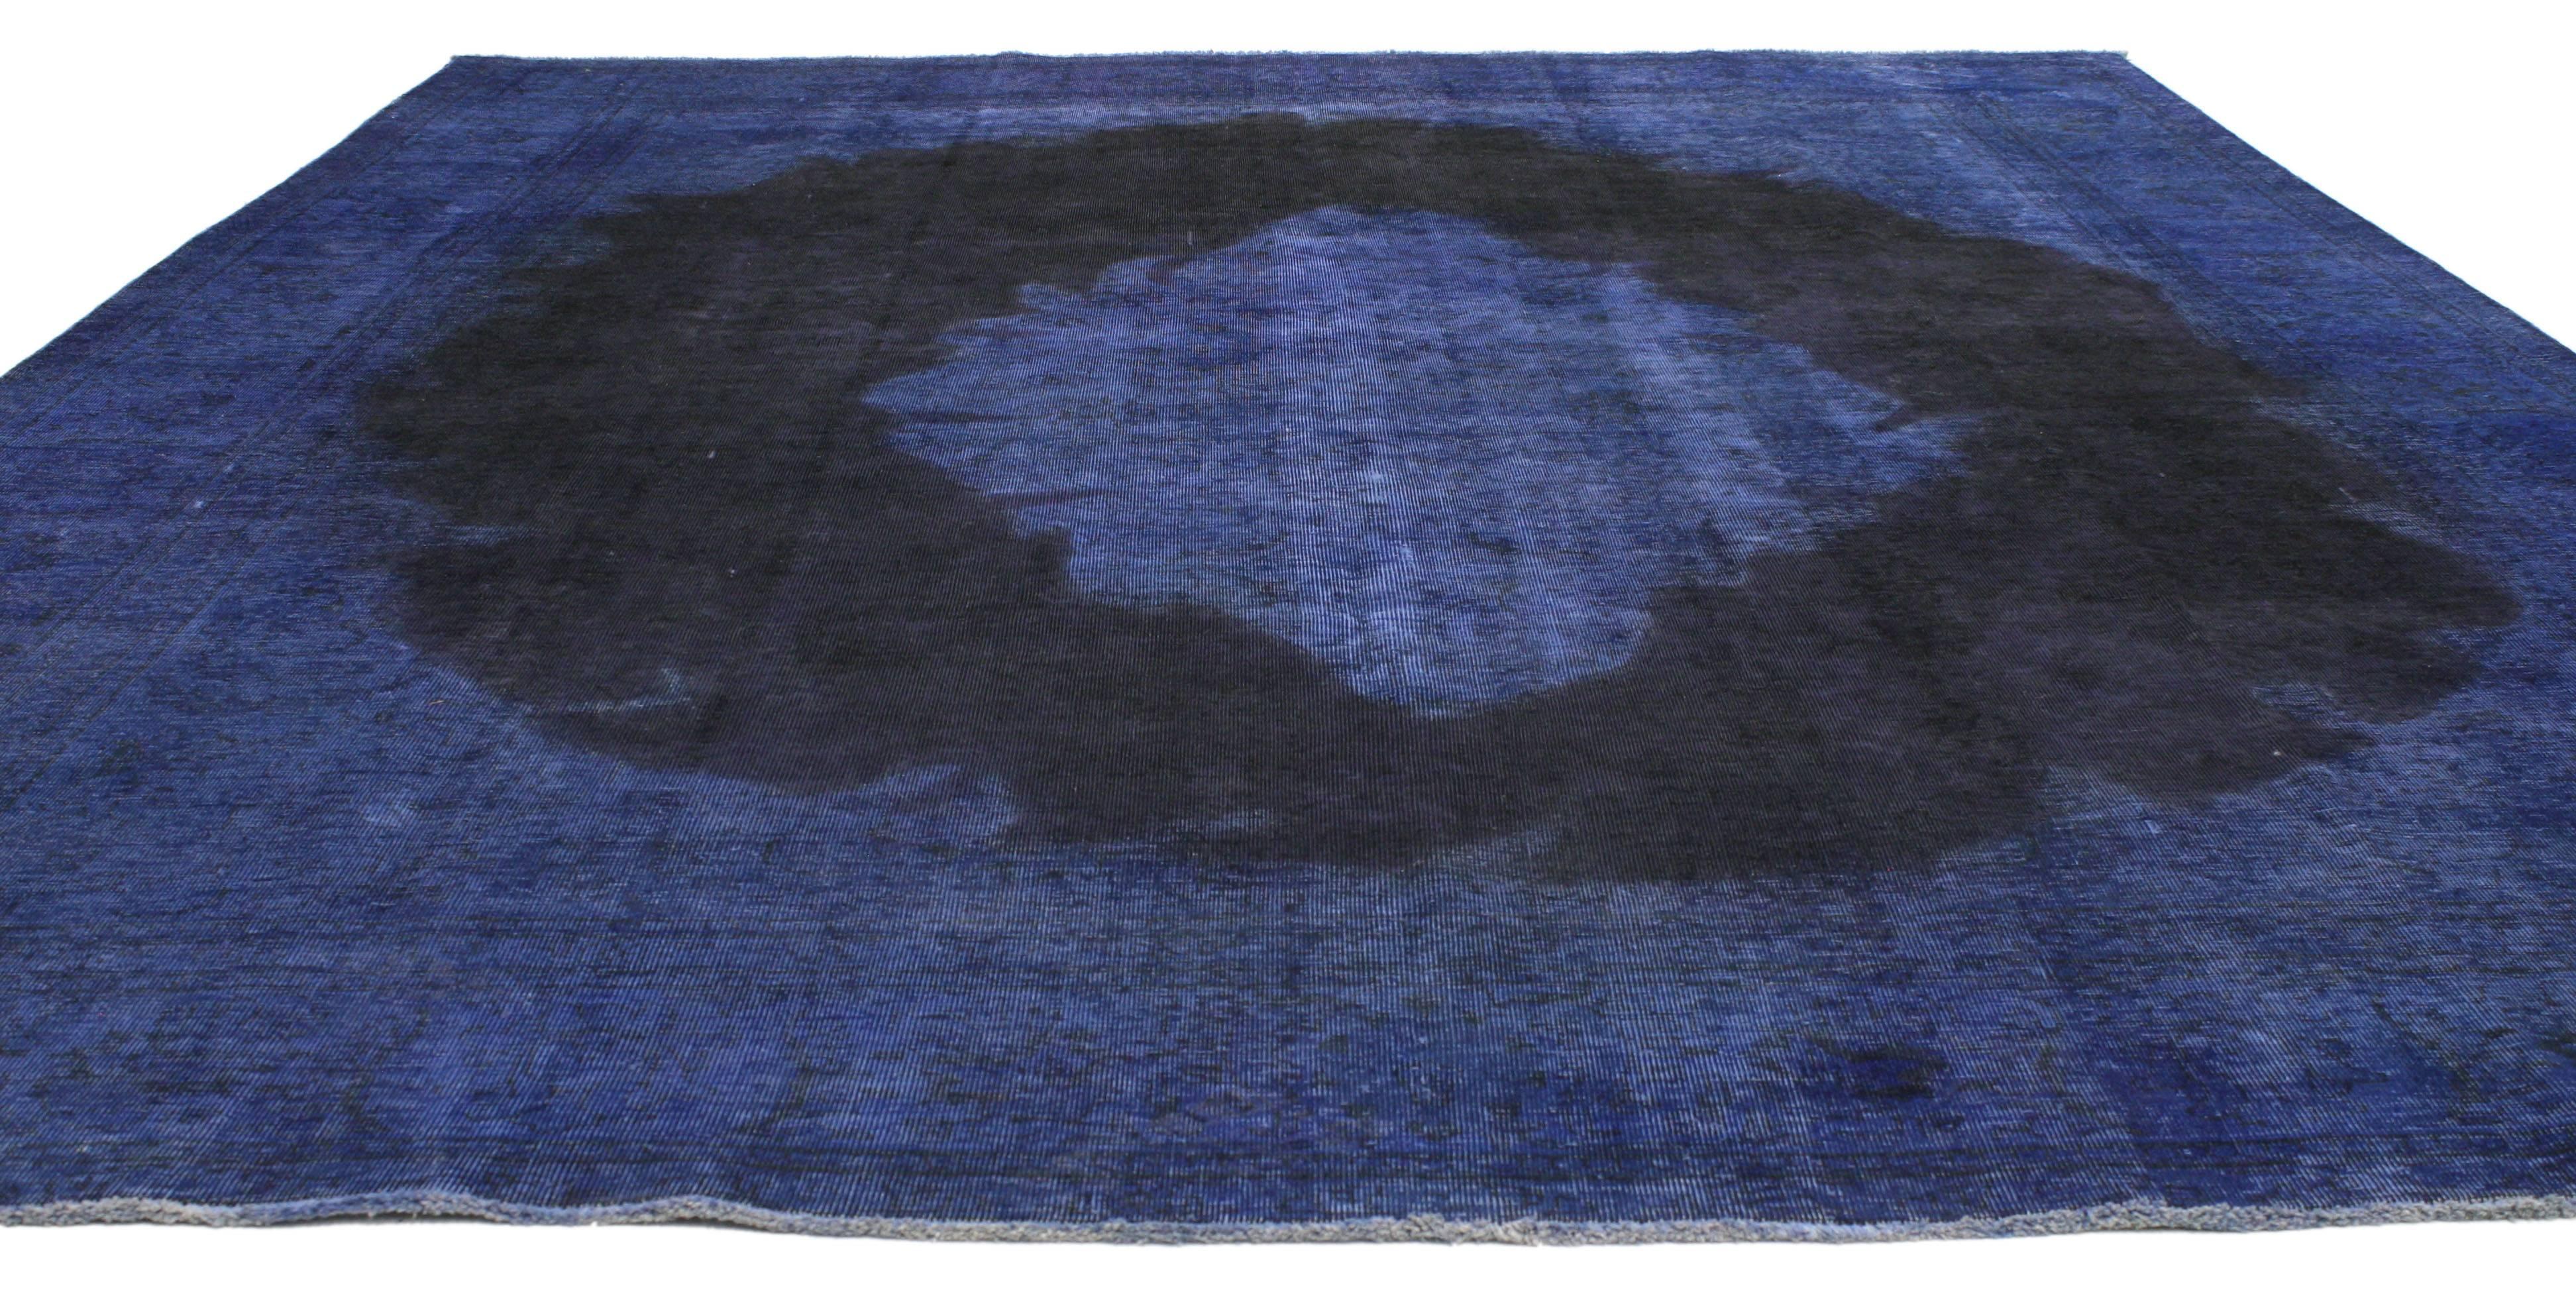 This beautifully composed overdyed blue vintage Persian gallery rug features a center medallion in an open navy blue field surrounded by a complementary border highlighting its modern Industrial style. Deeply saturated with variegated shades of blue